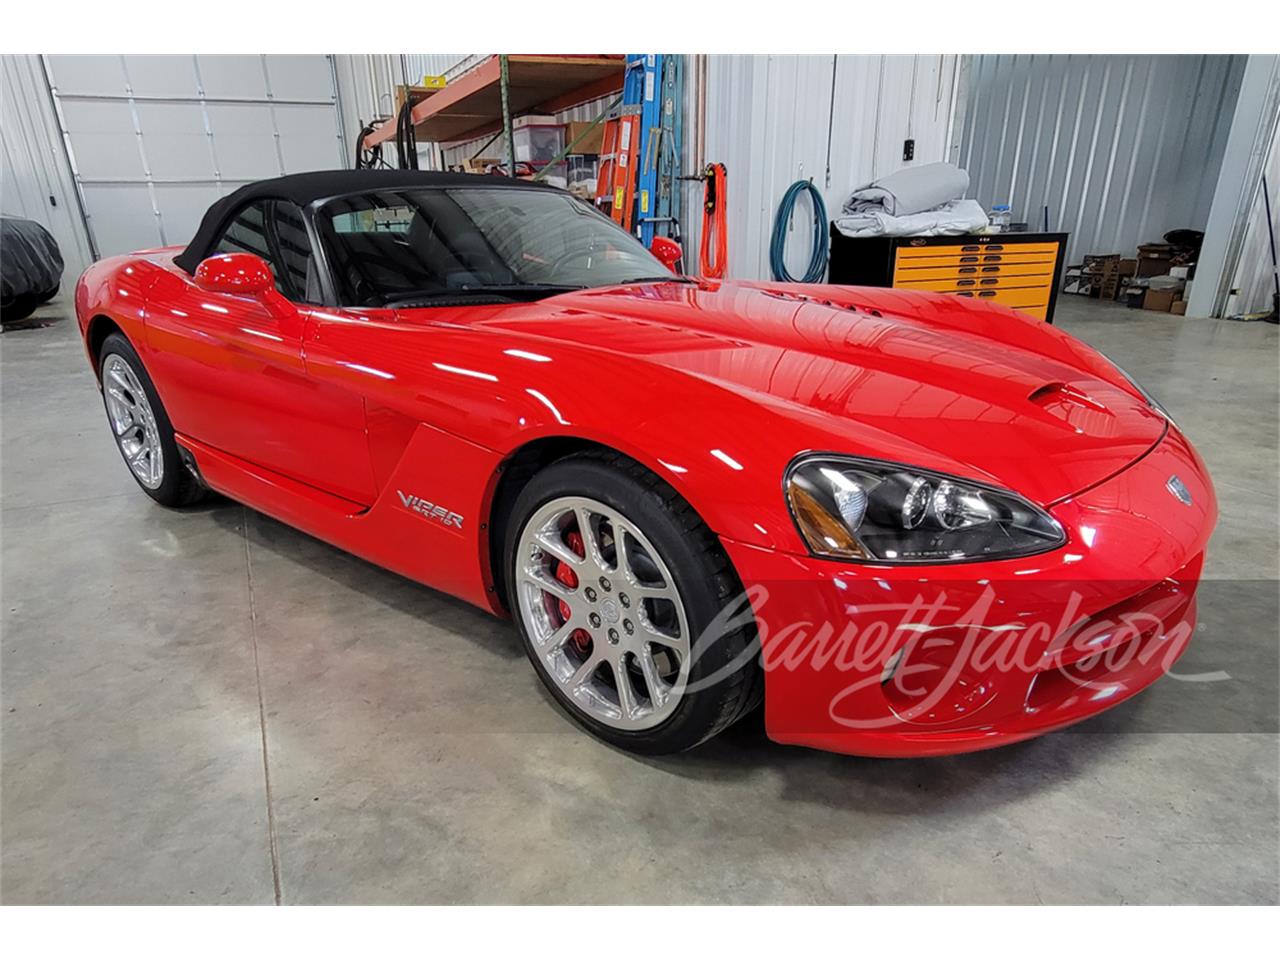 For Sale at Auction: 2004 Dodge Viper in Scottsdale, Arizona for sale in Scottsdale, AZ